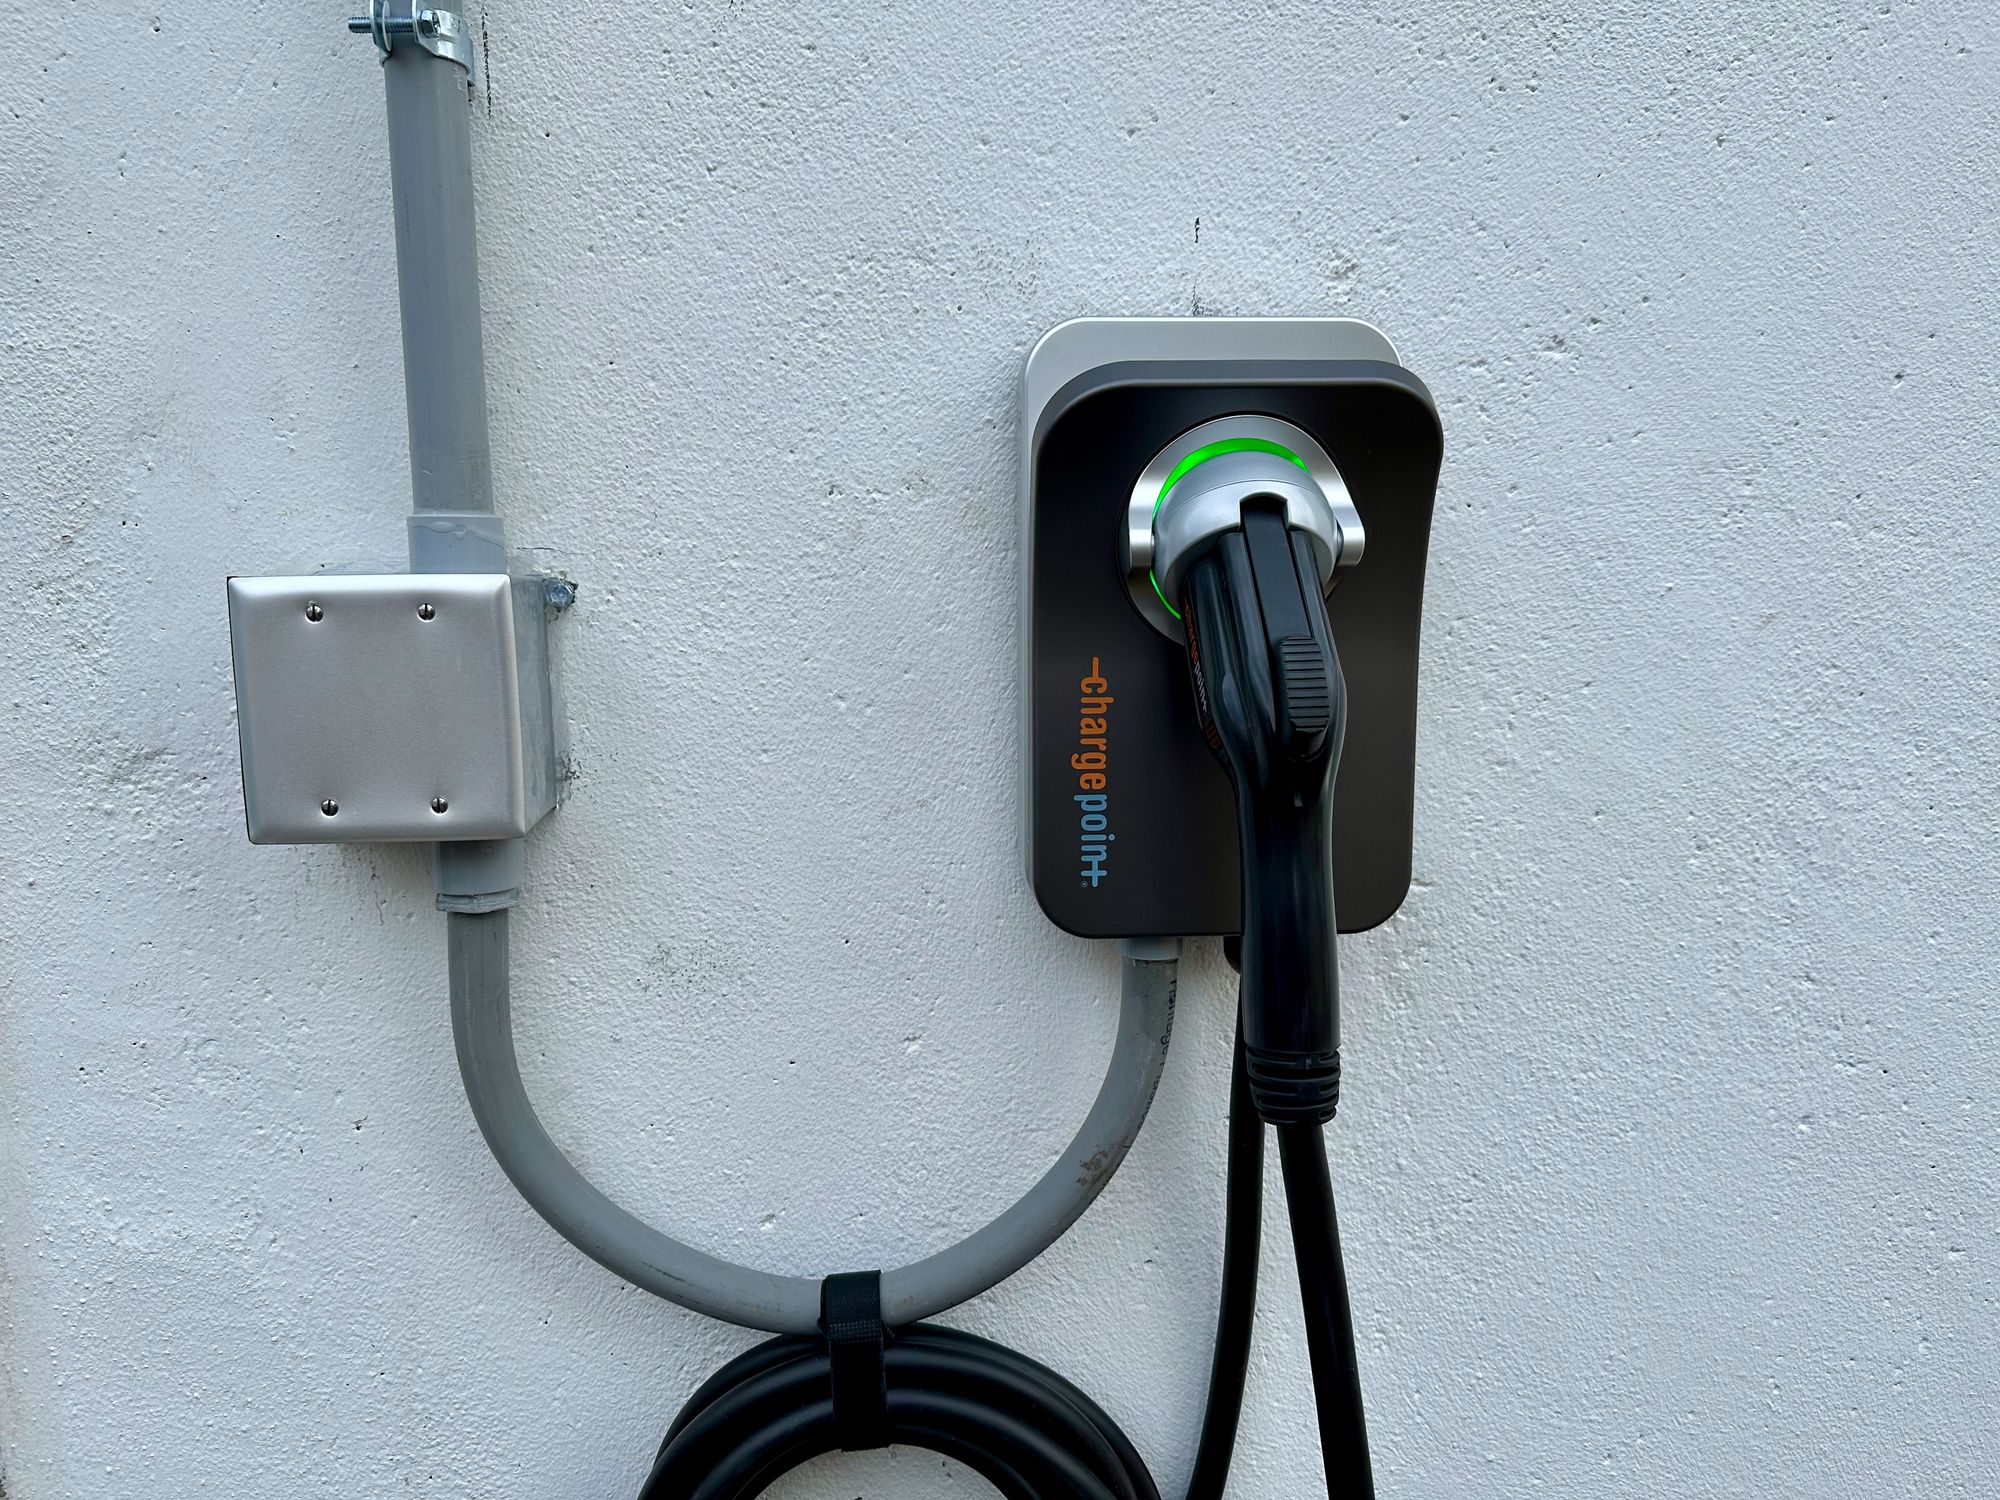 A Chargepoint EVSE unit mounted on an exterior wall.